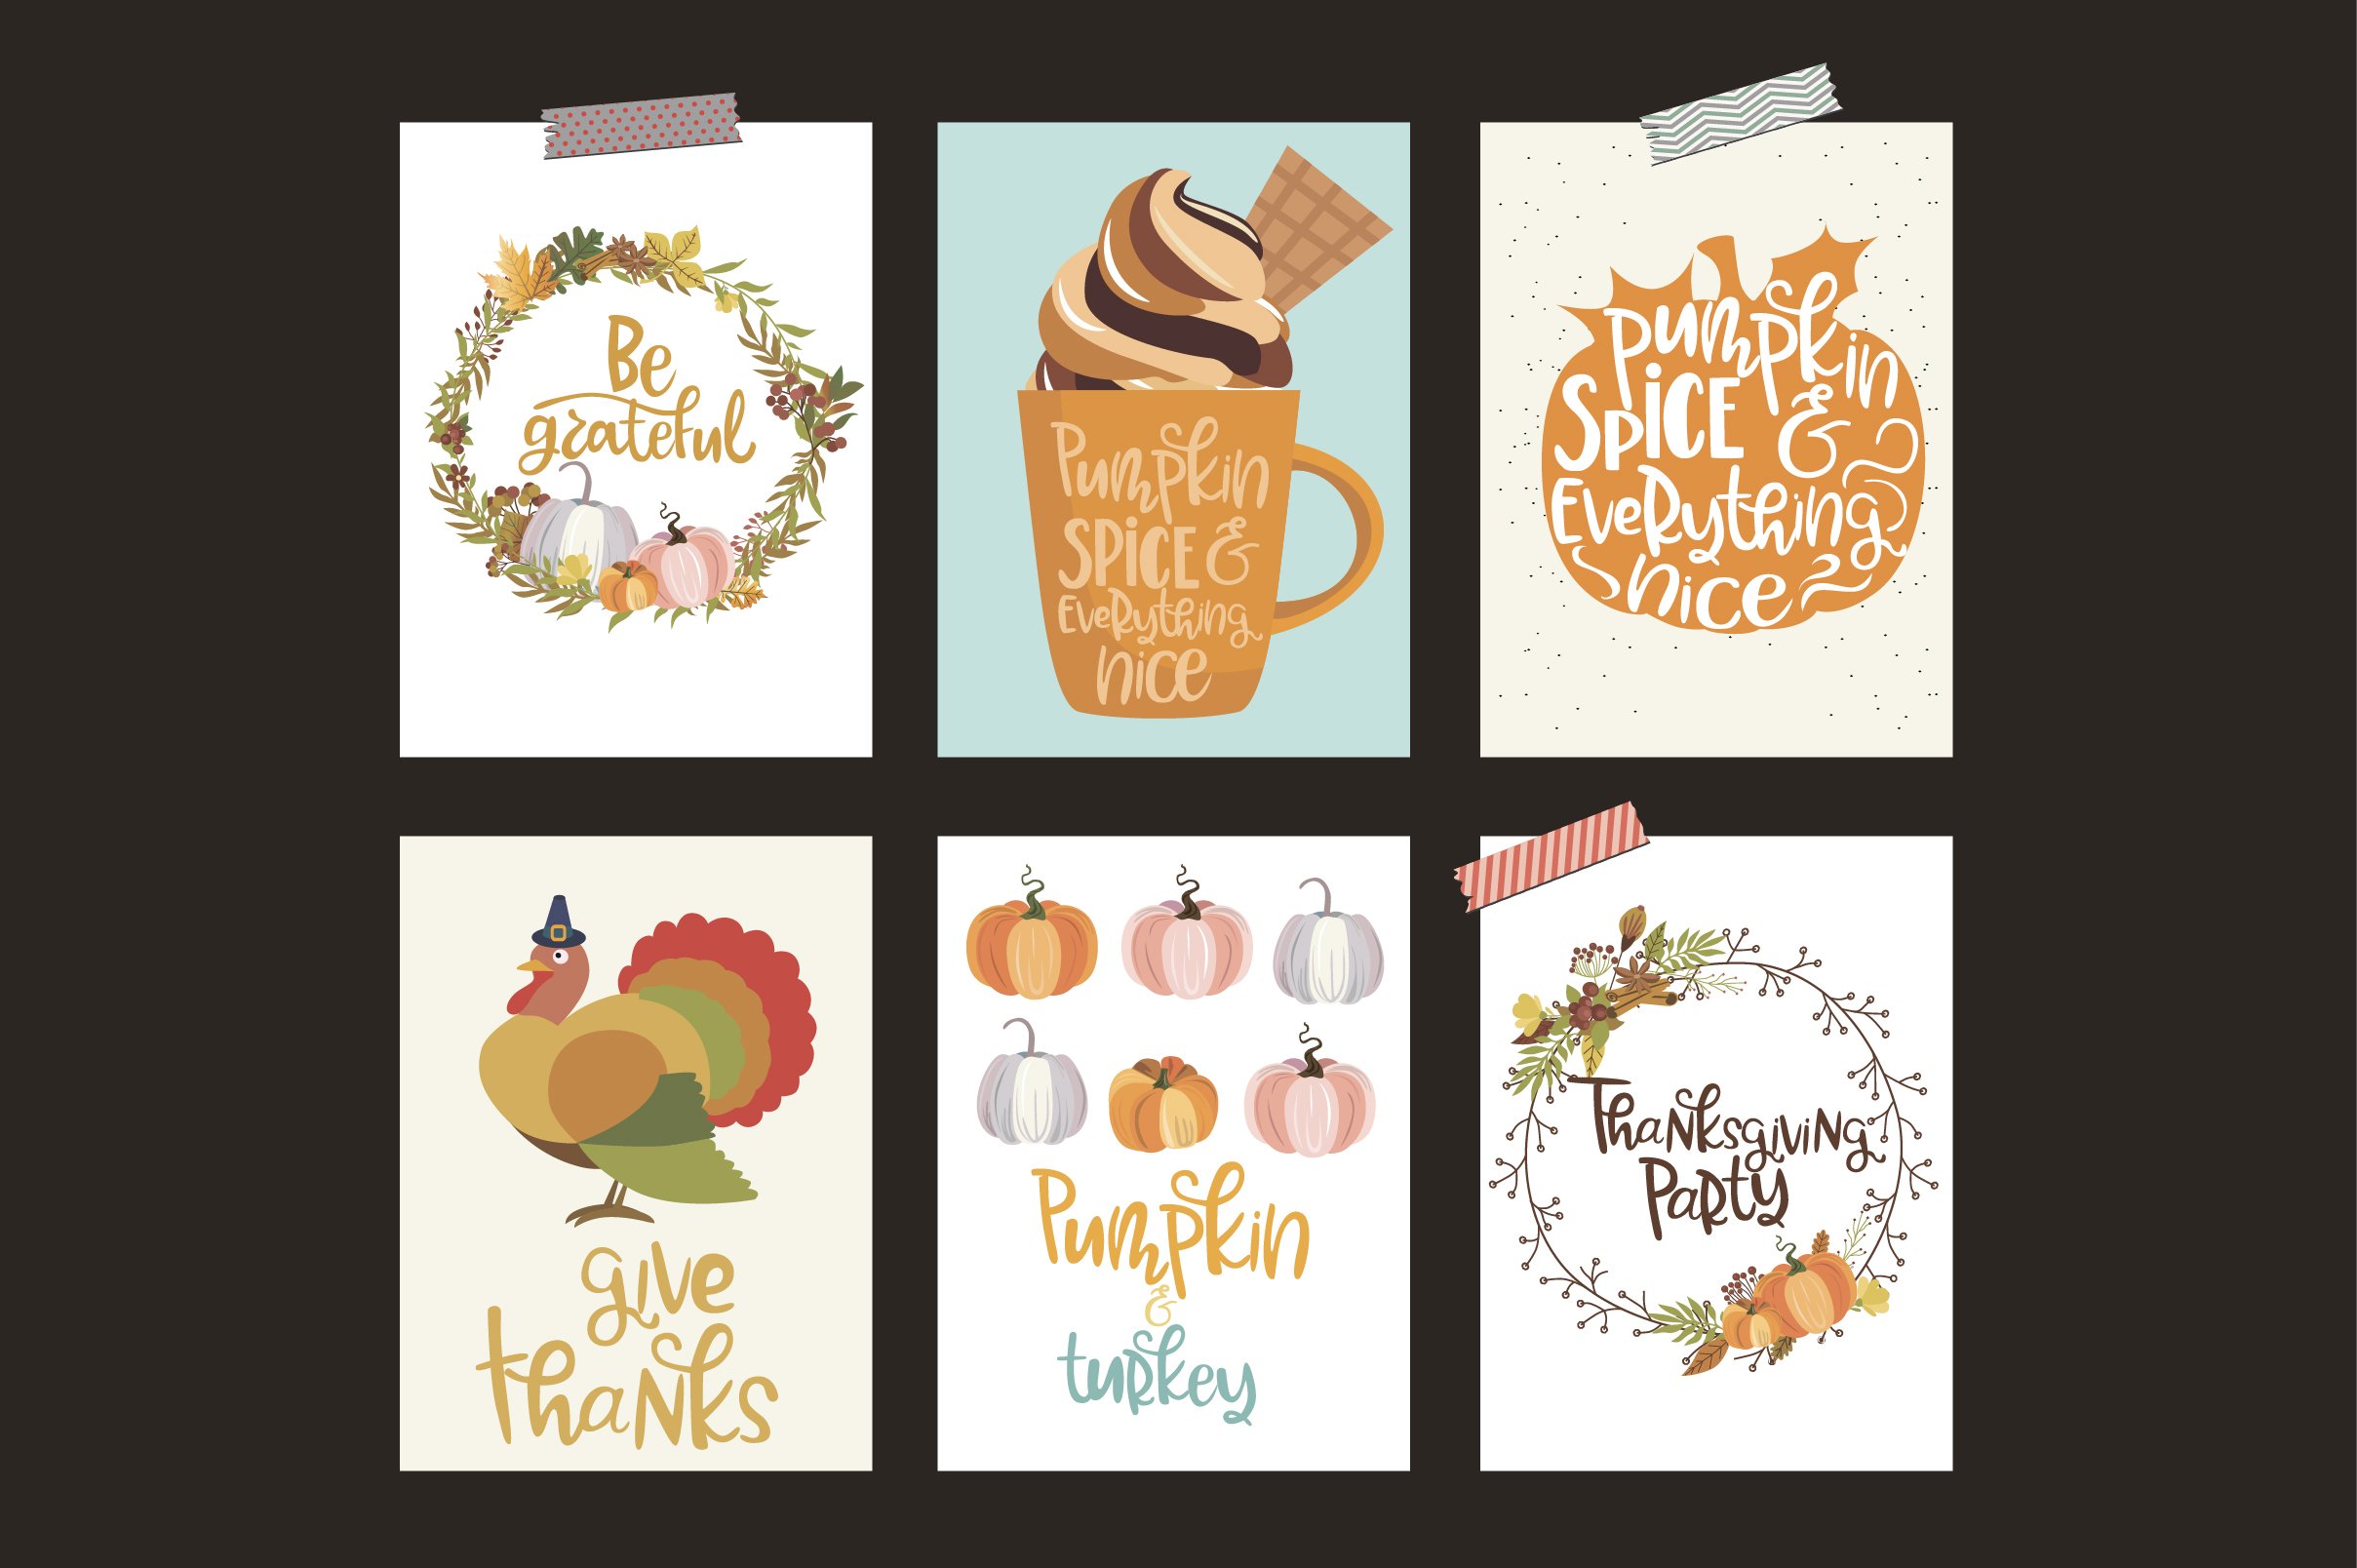 Stylish cards for Thanksgiving.